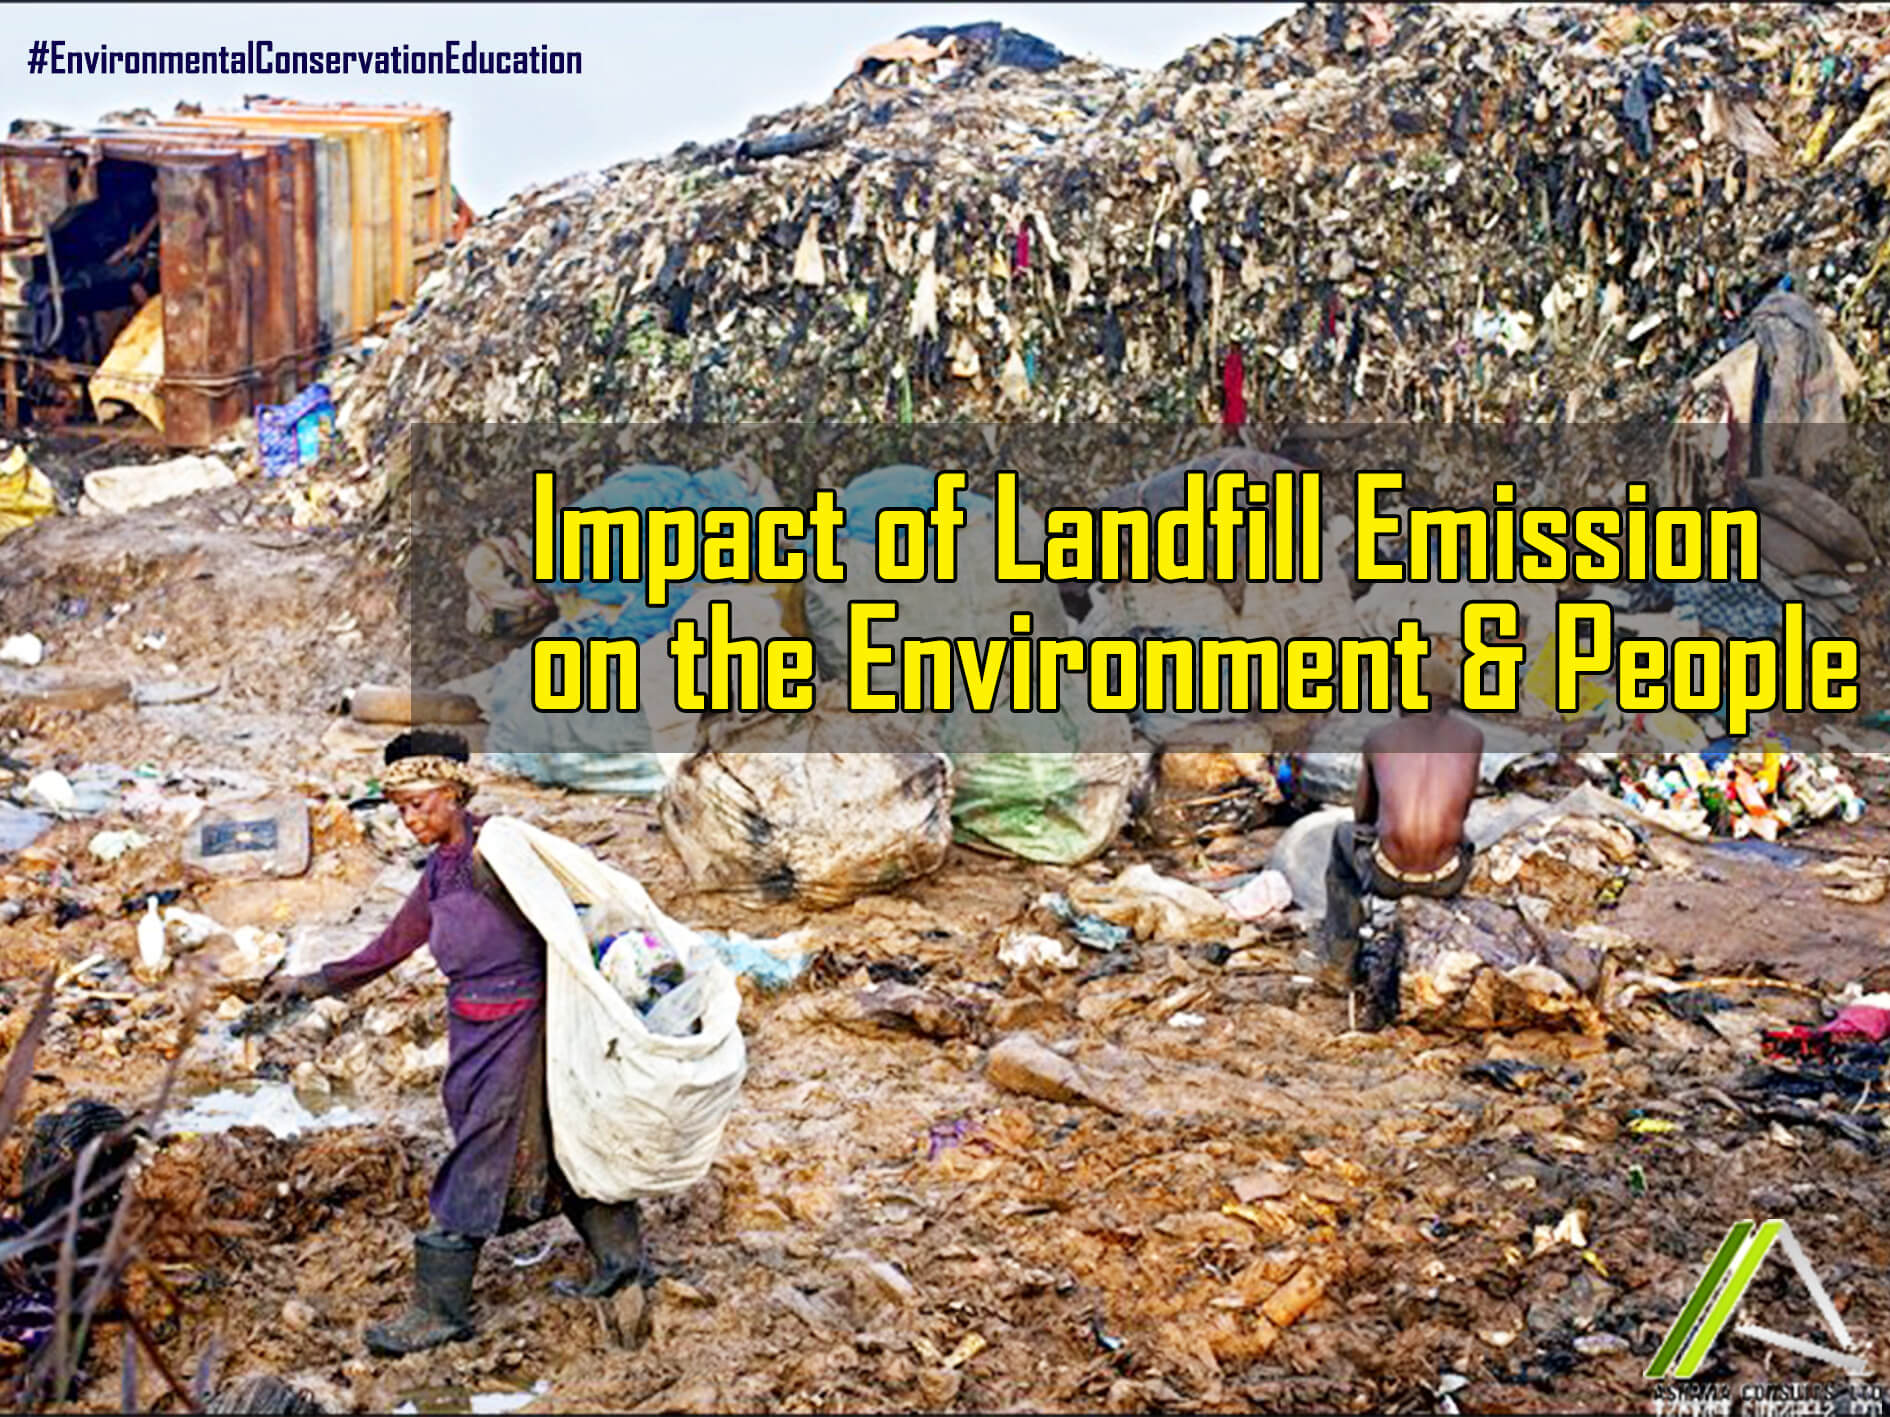 MANAGEMENT OF LANDFILL EMISSION AND THEIR IMPACT ON THE ENVIRONMENT